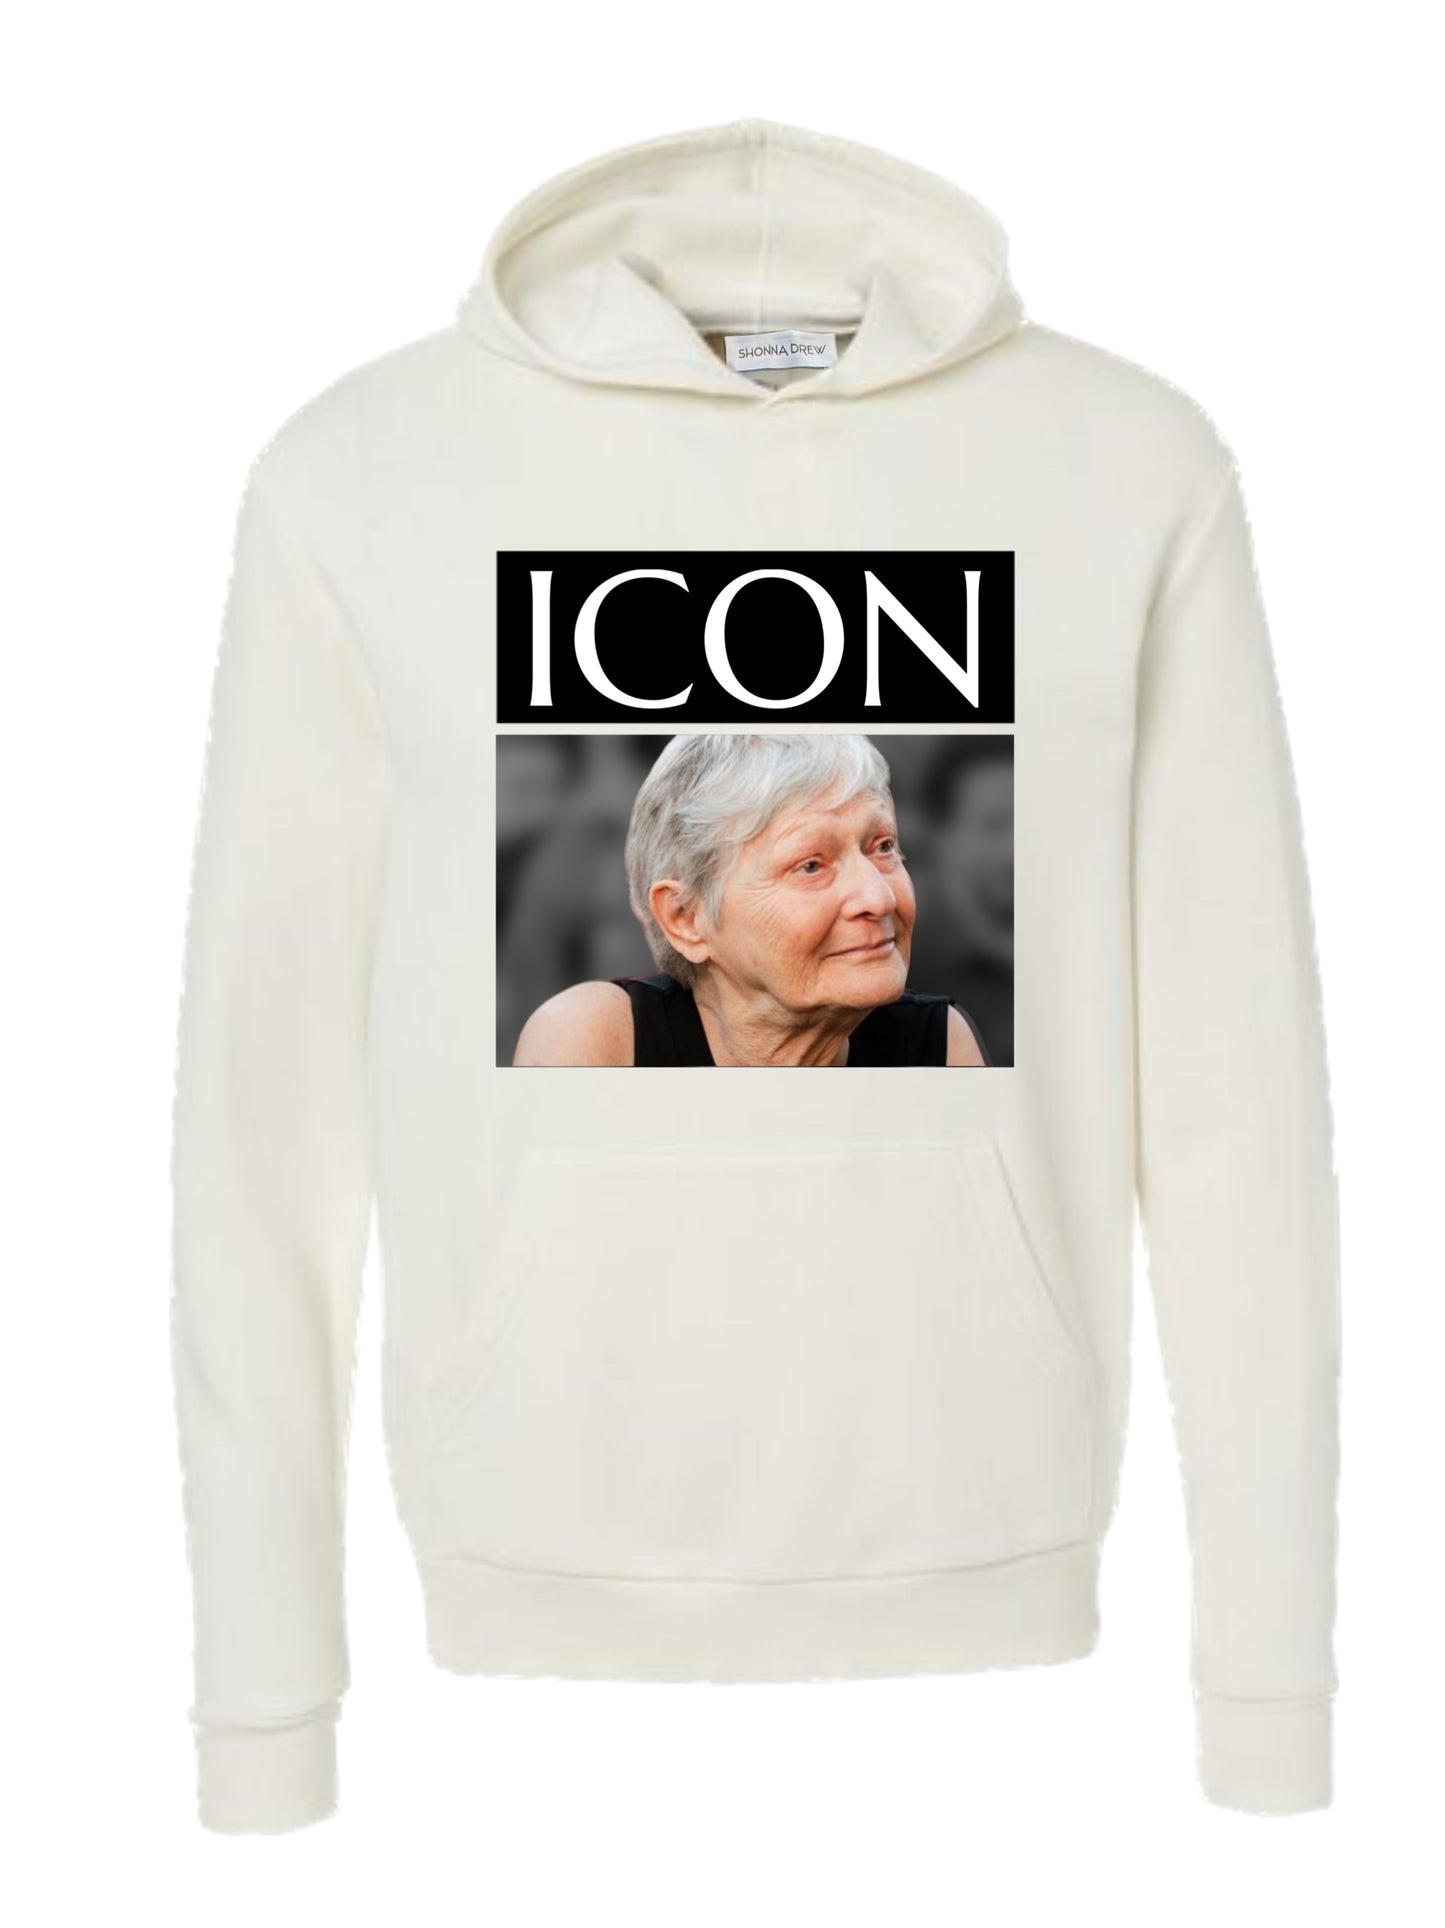 “ICON” Hoodie /Limited Edition